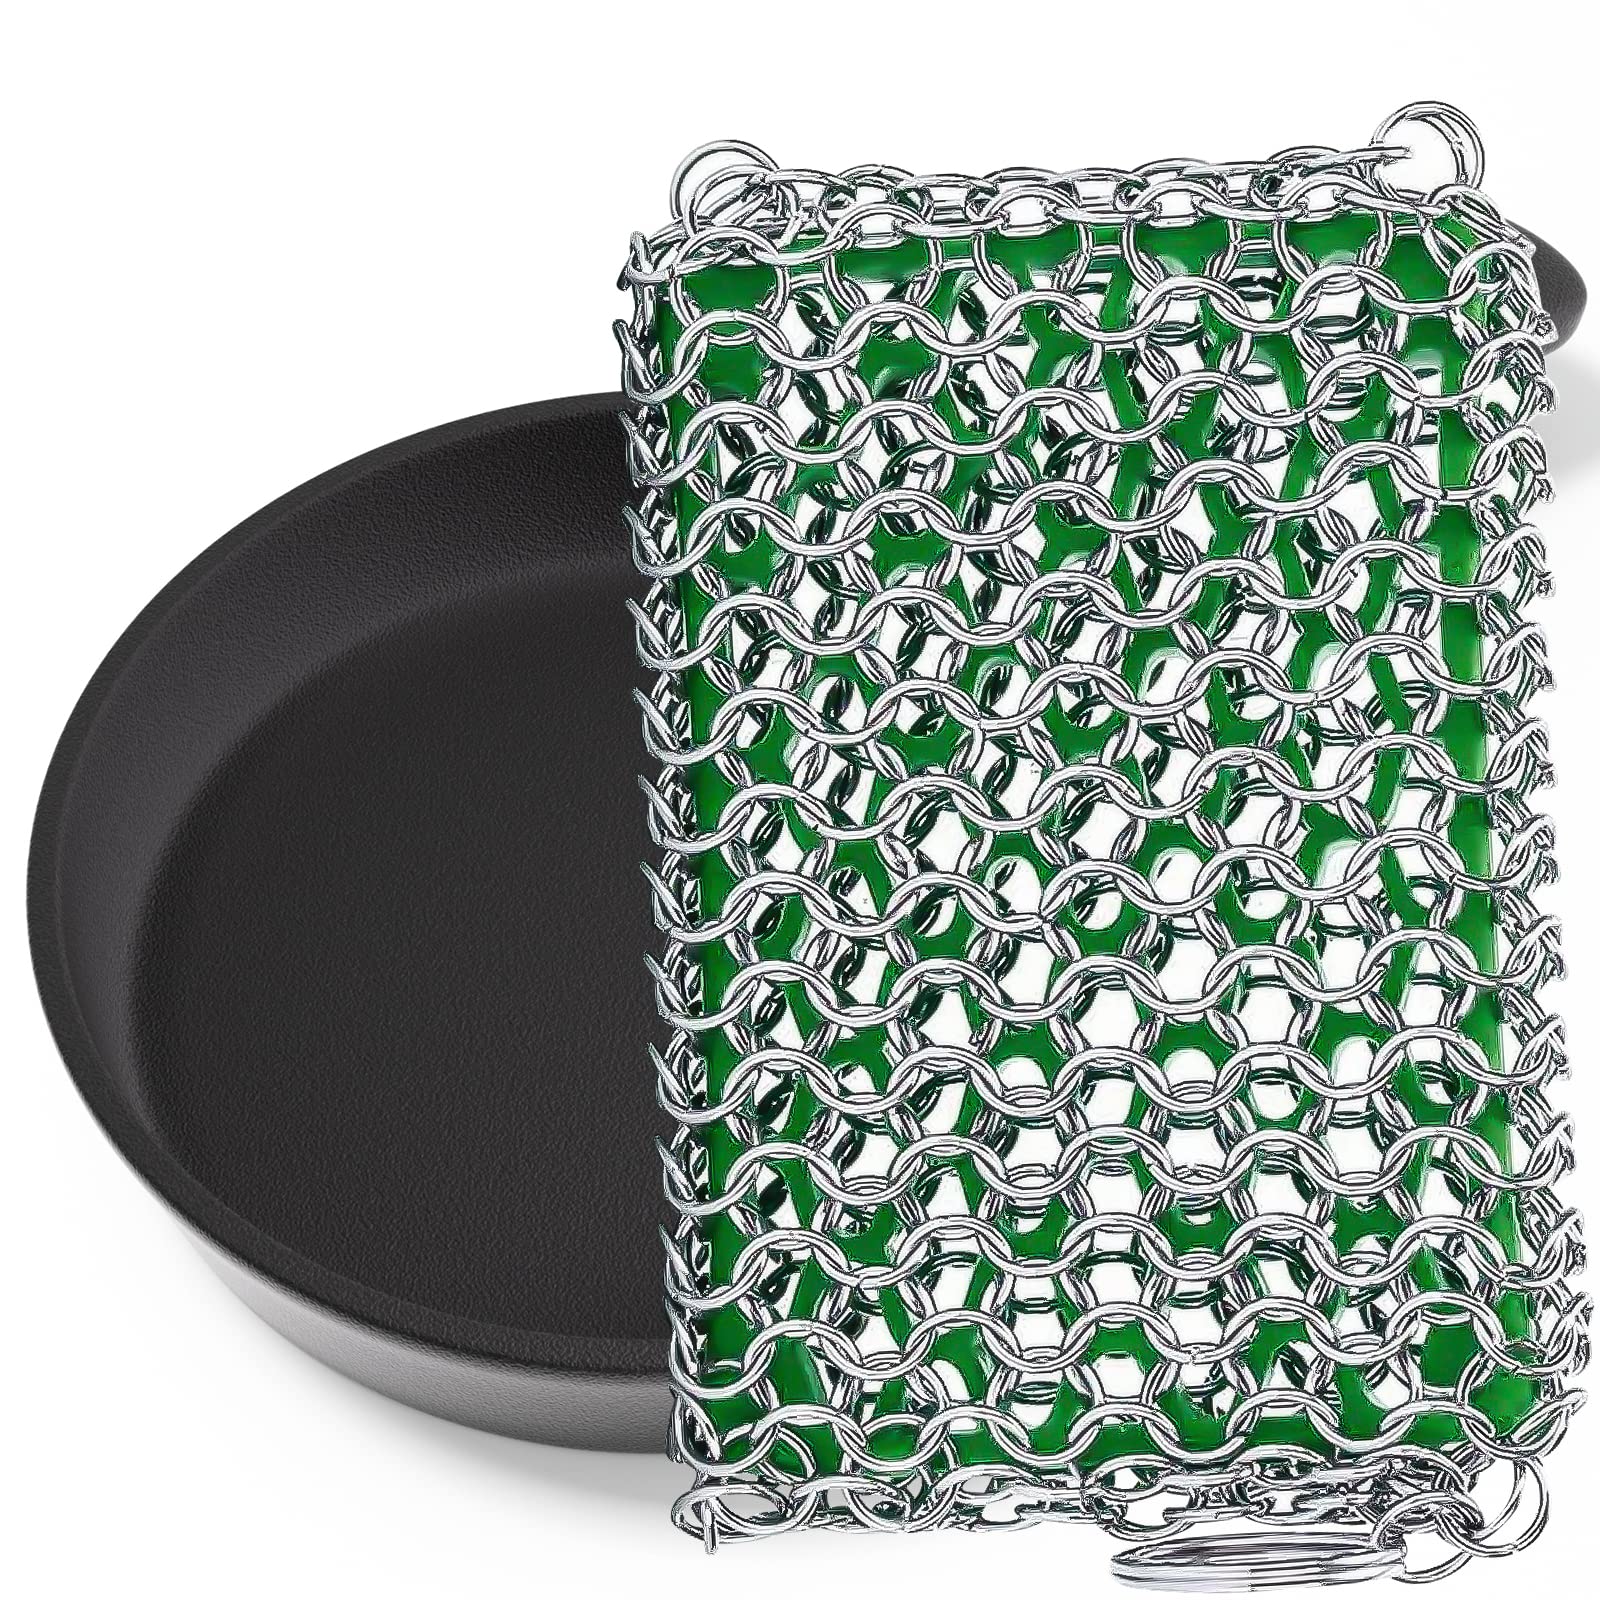 316 Premium Stainless Steel Chainmail Scrubber Dish Scouring Pad